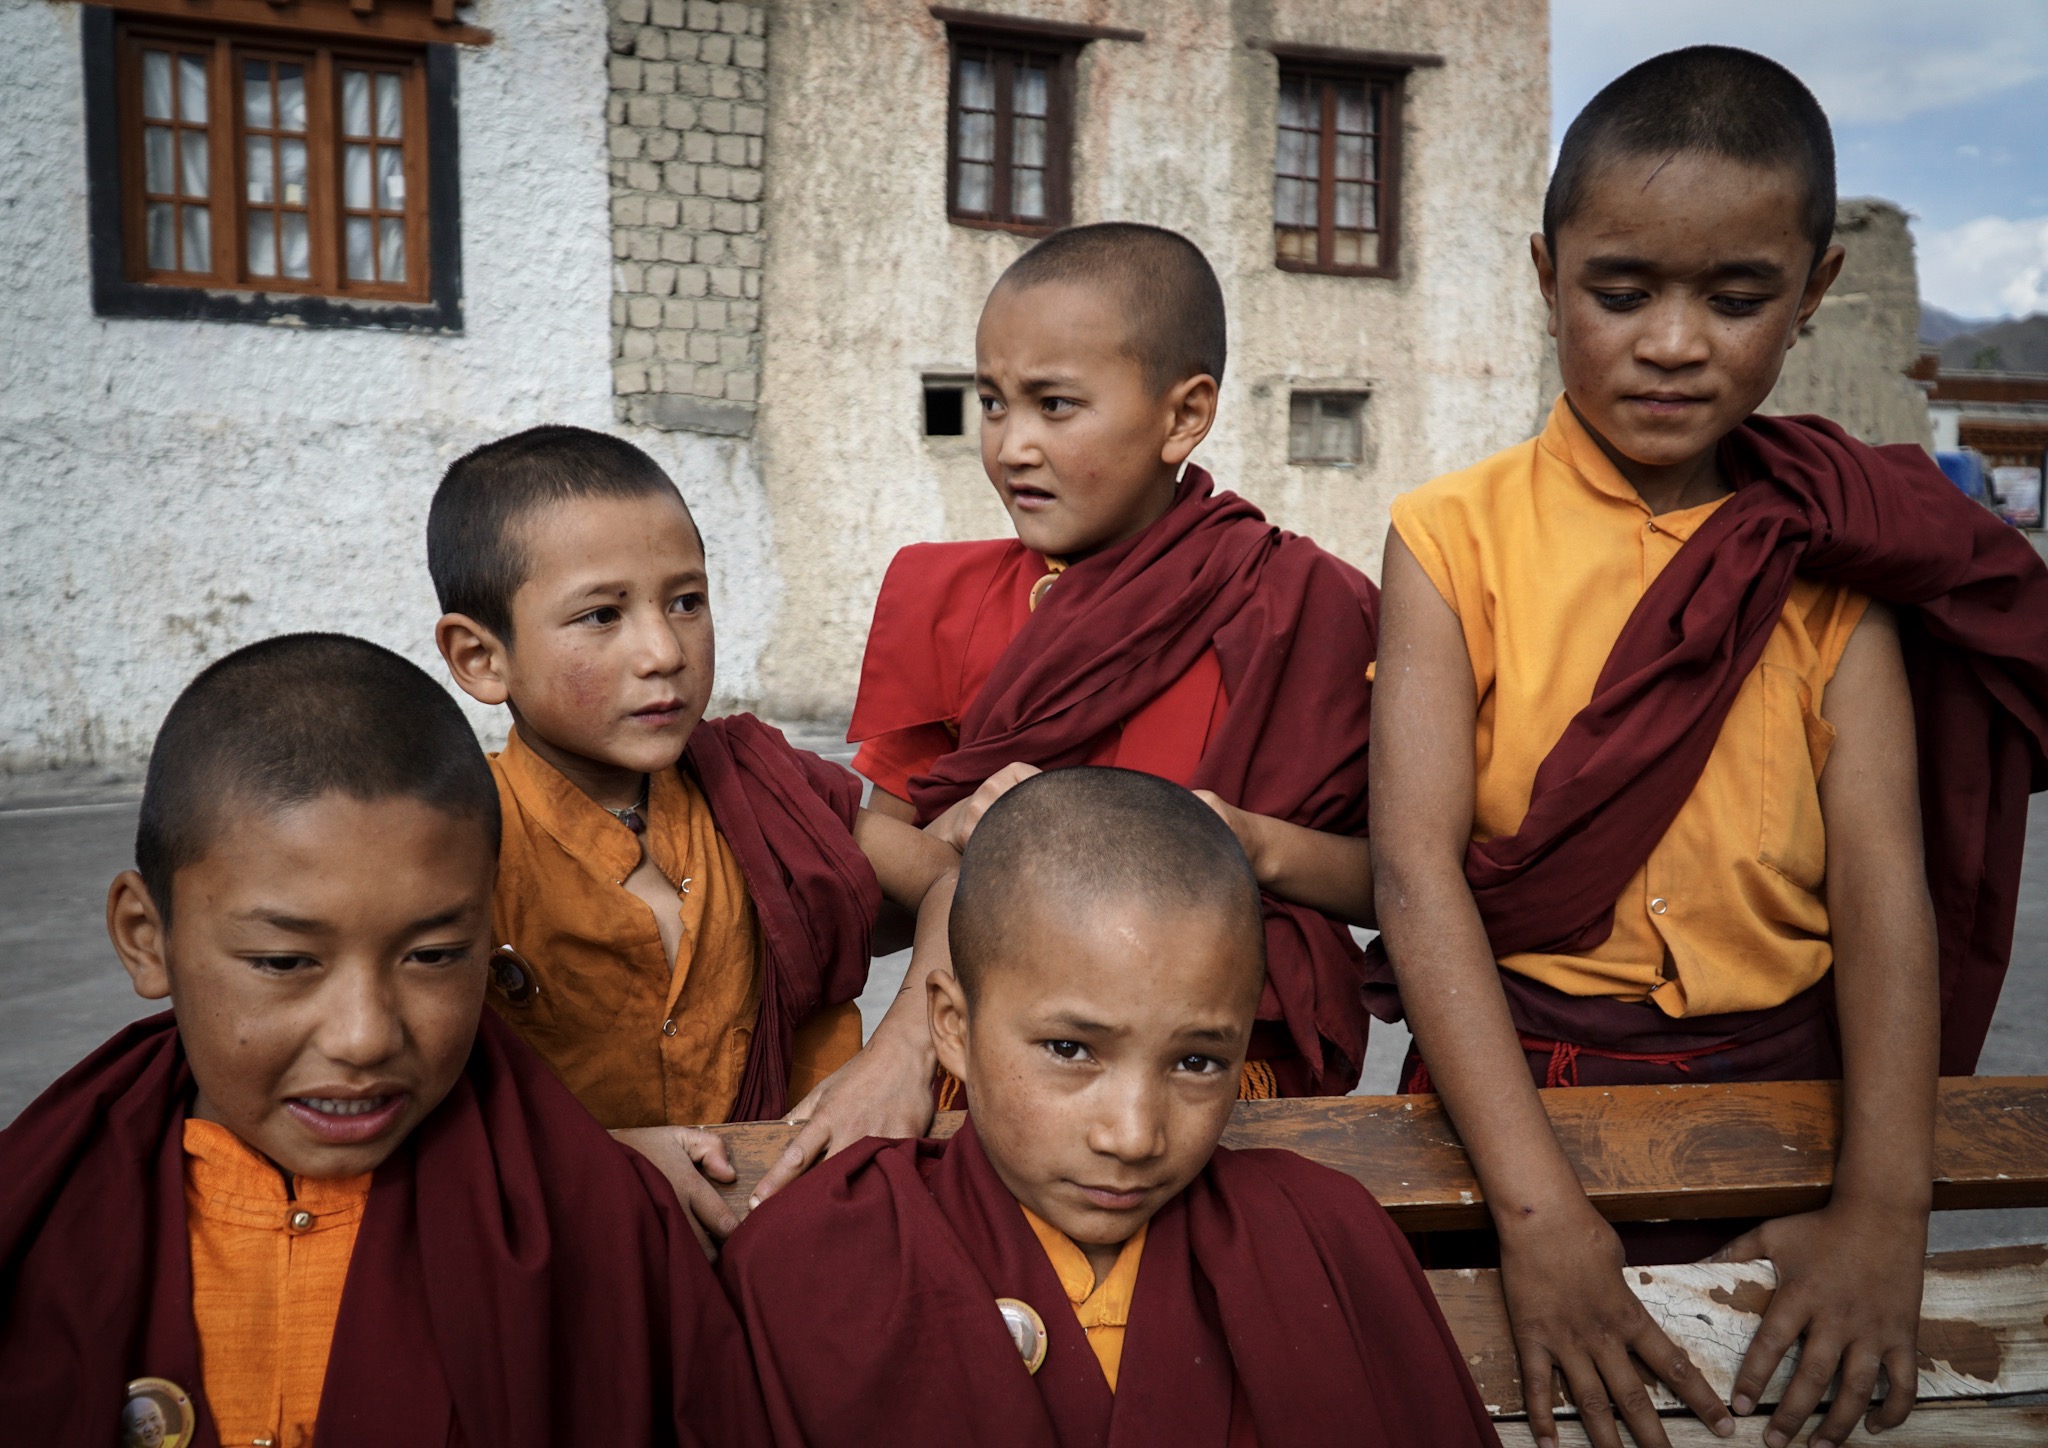 With almost all the Buddhist monks from this monastery elsewhere in Ladakh having teachings with the Dalai Lama, these novice monks enjoy some free time.